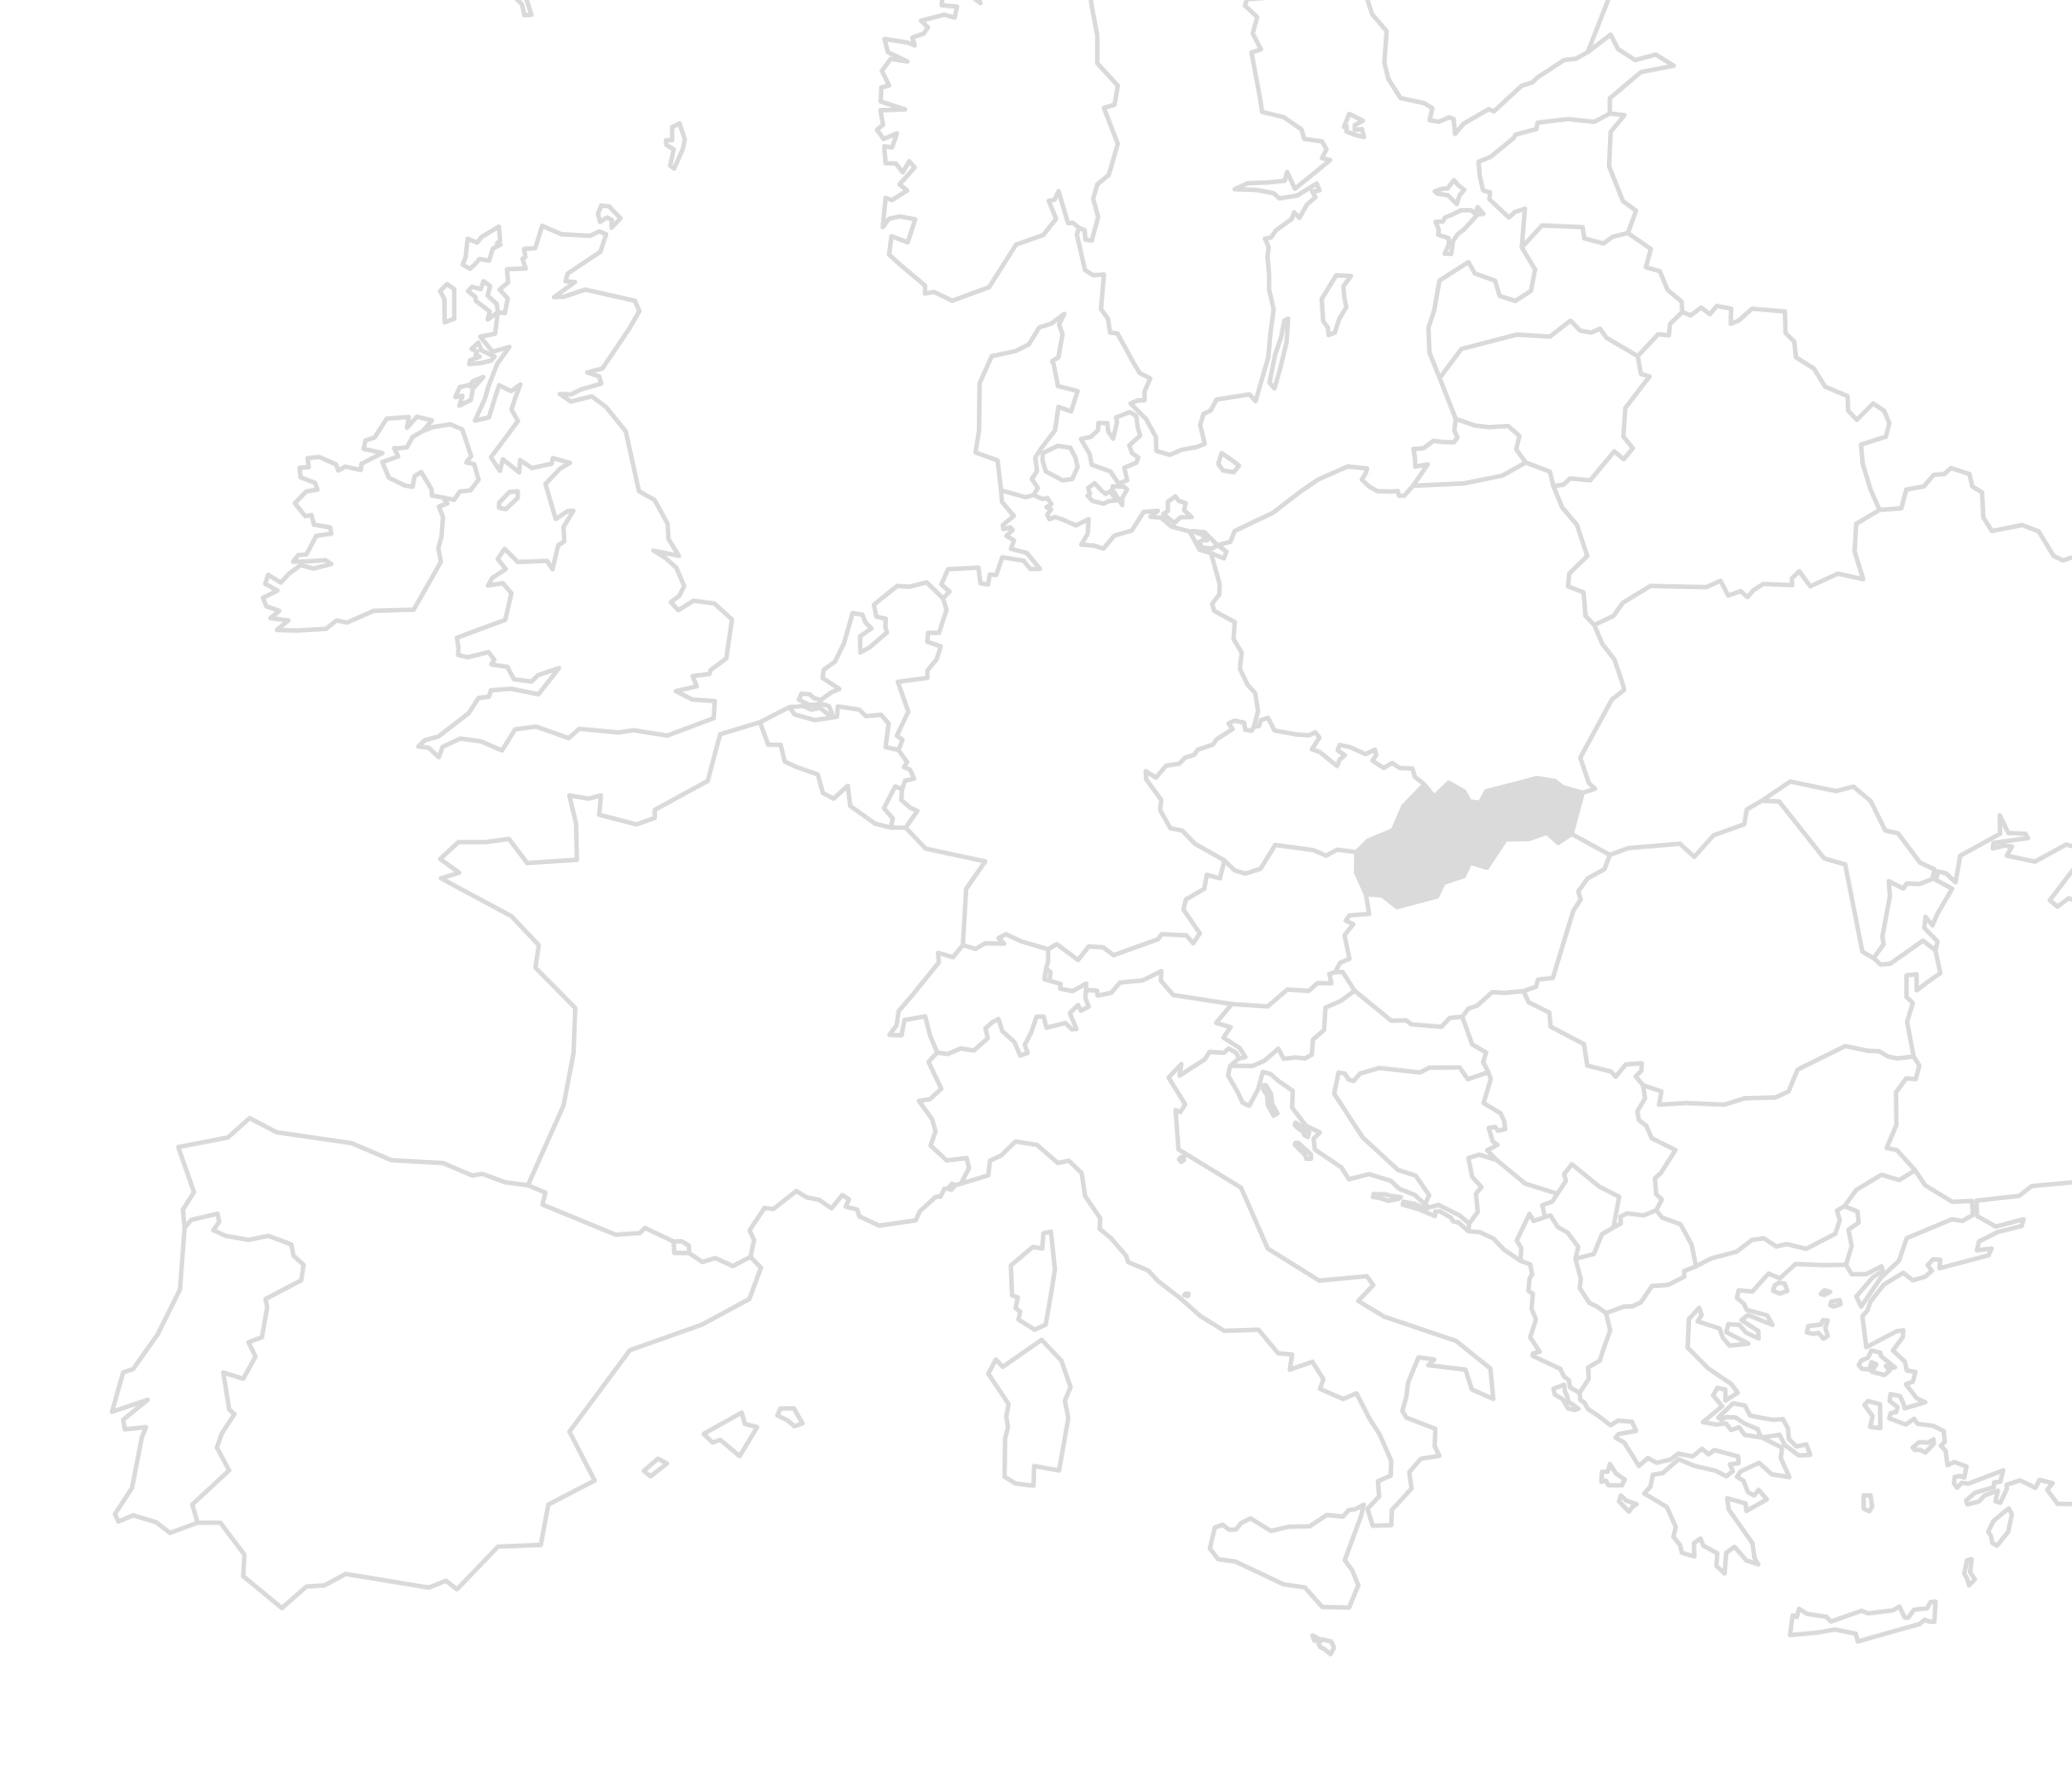 A map of Europe where Slovakia is filled in gray to visualize the location of the construction project.